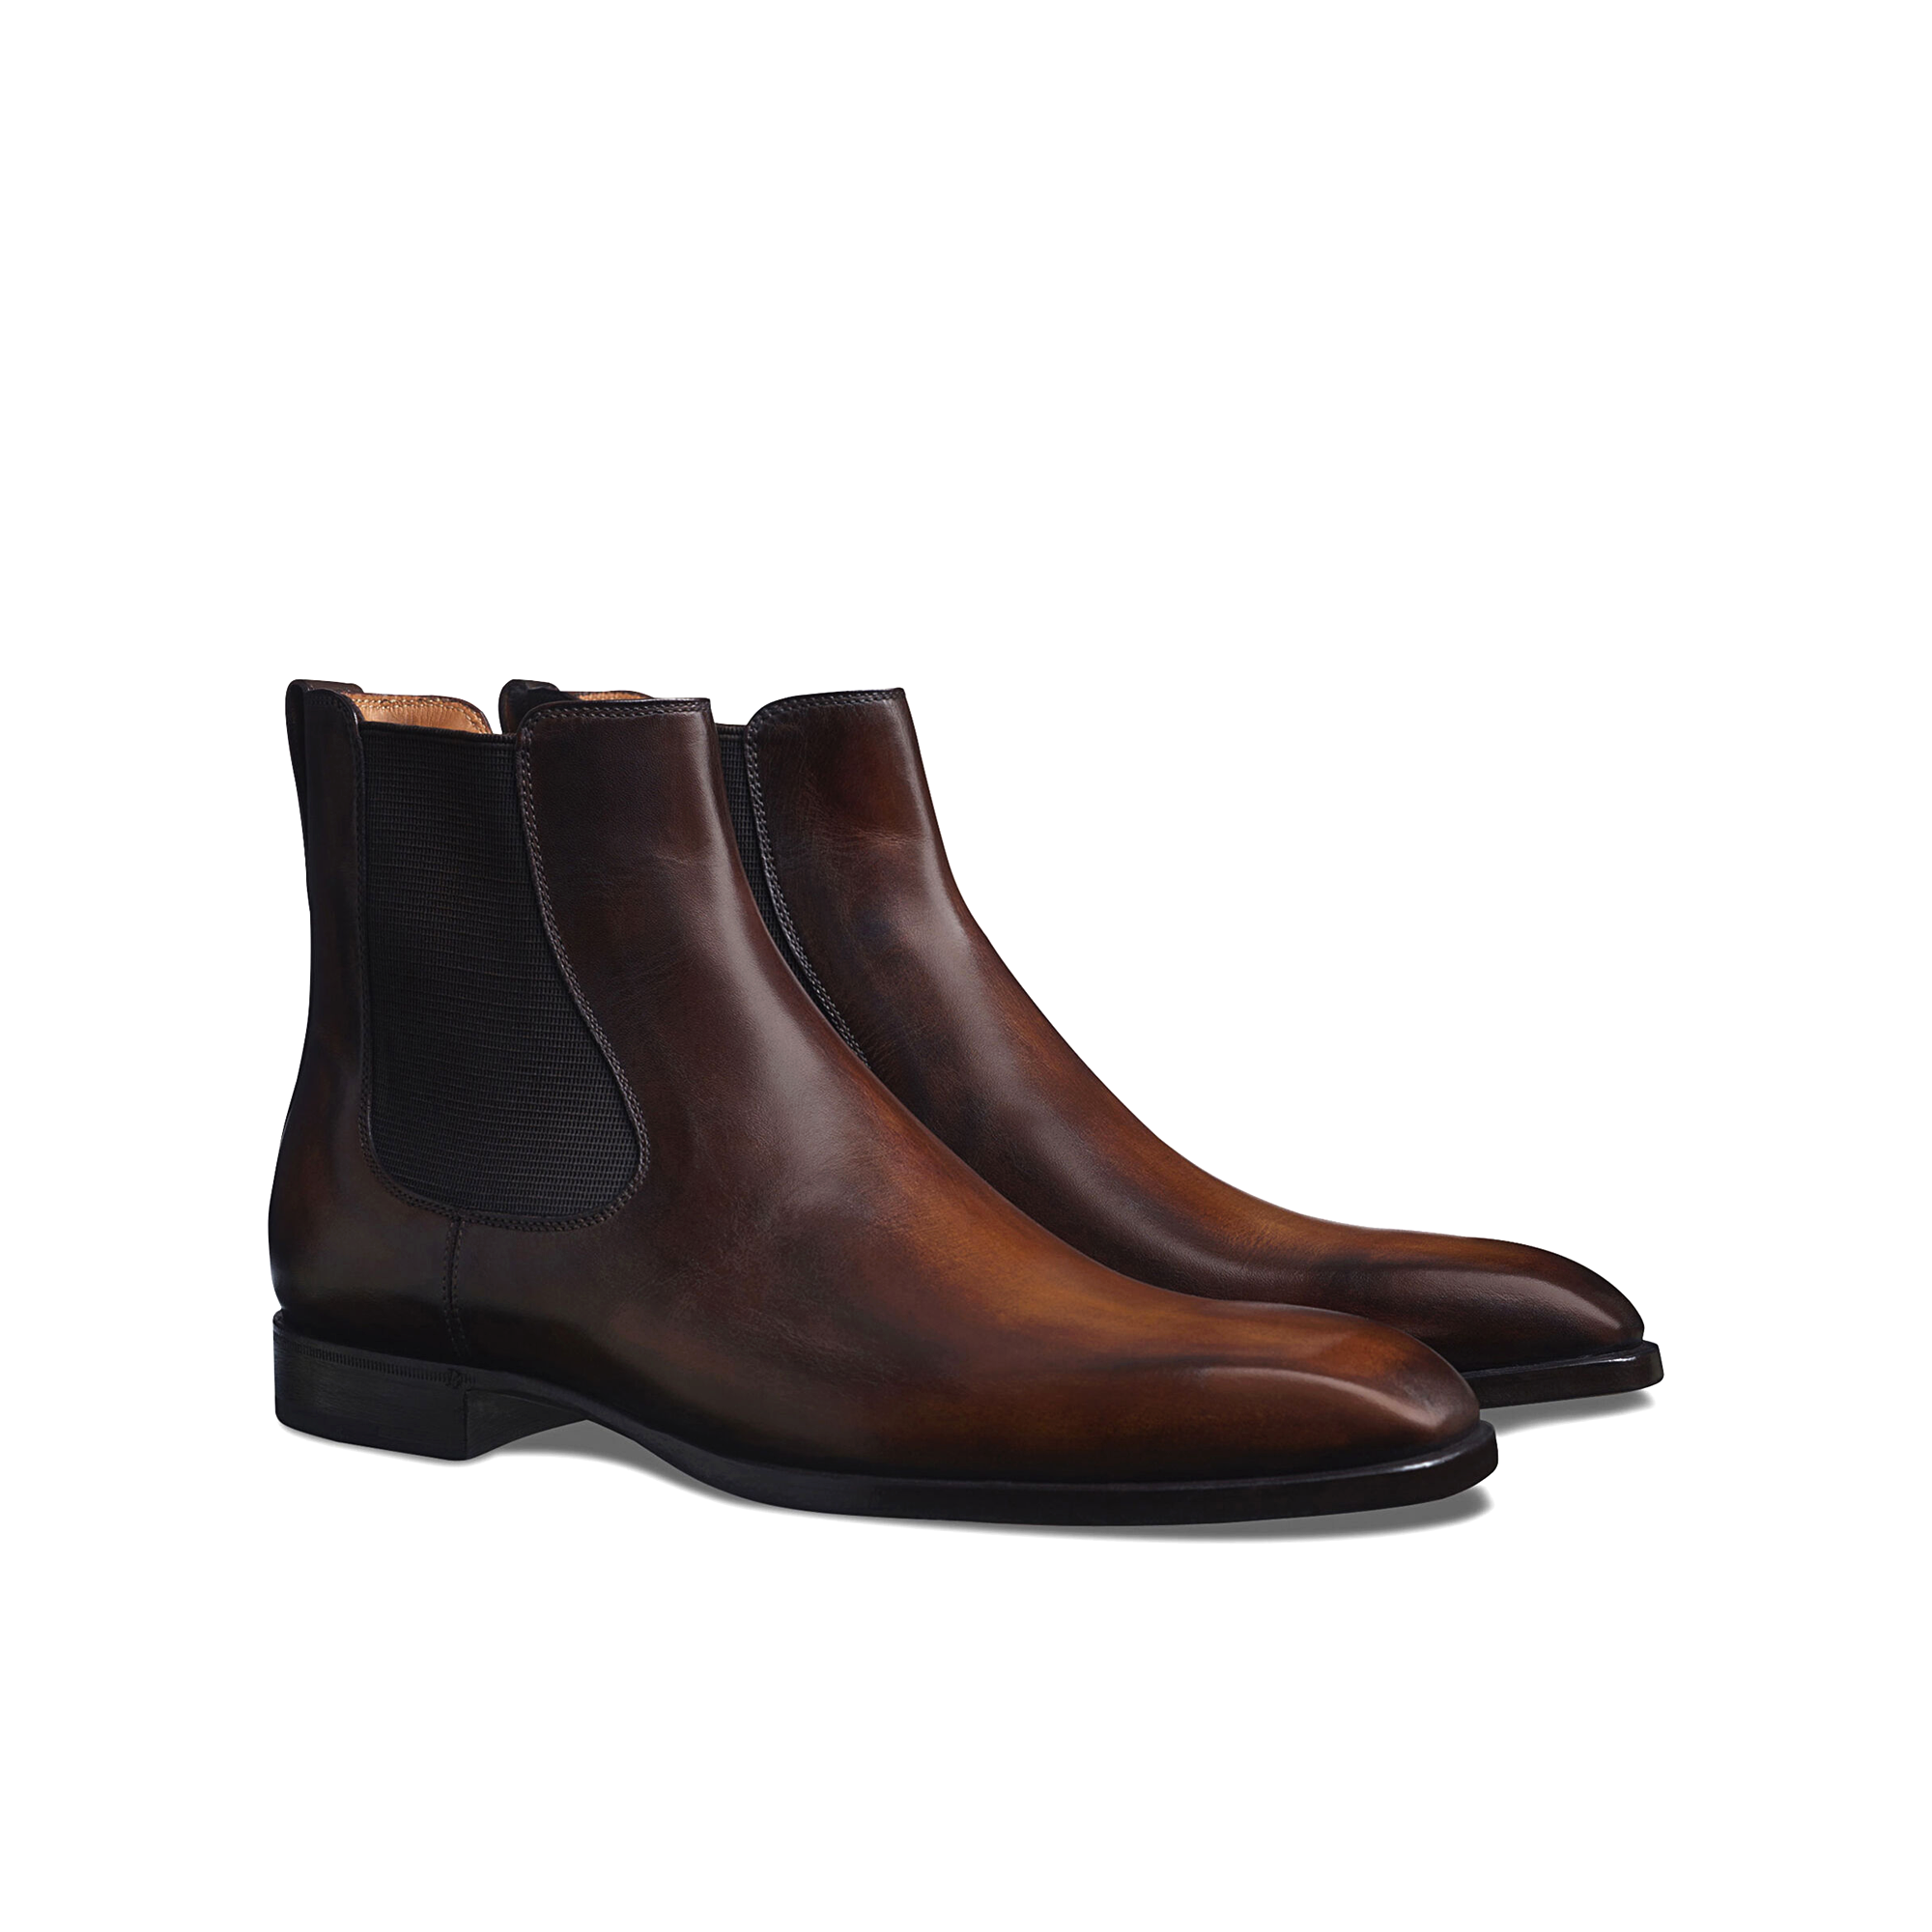 Sydney Whitaker Chelsea Boots